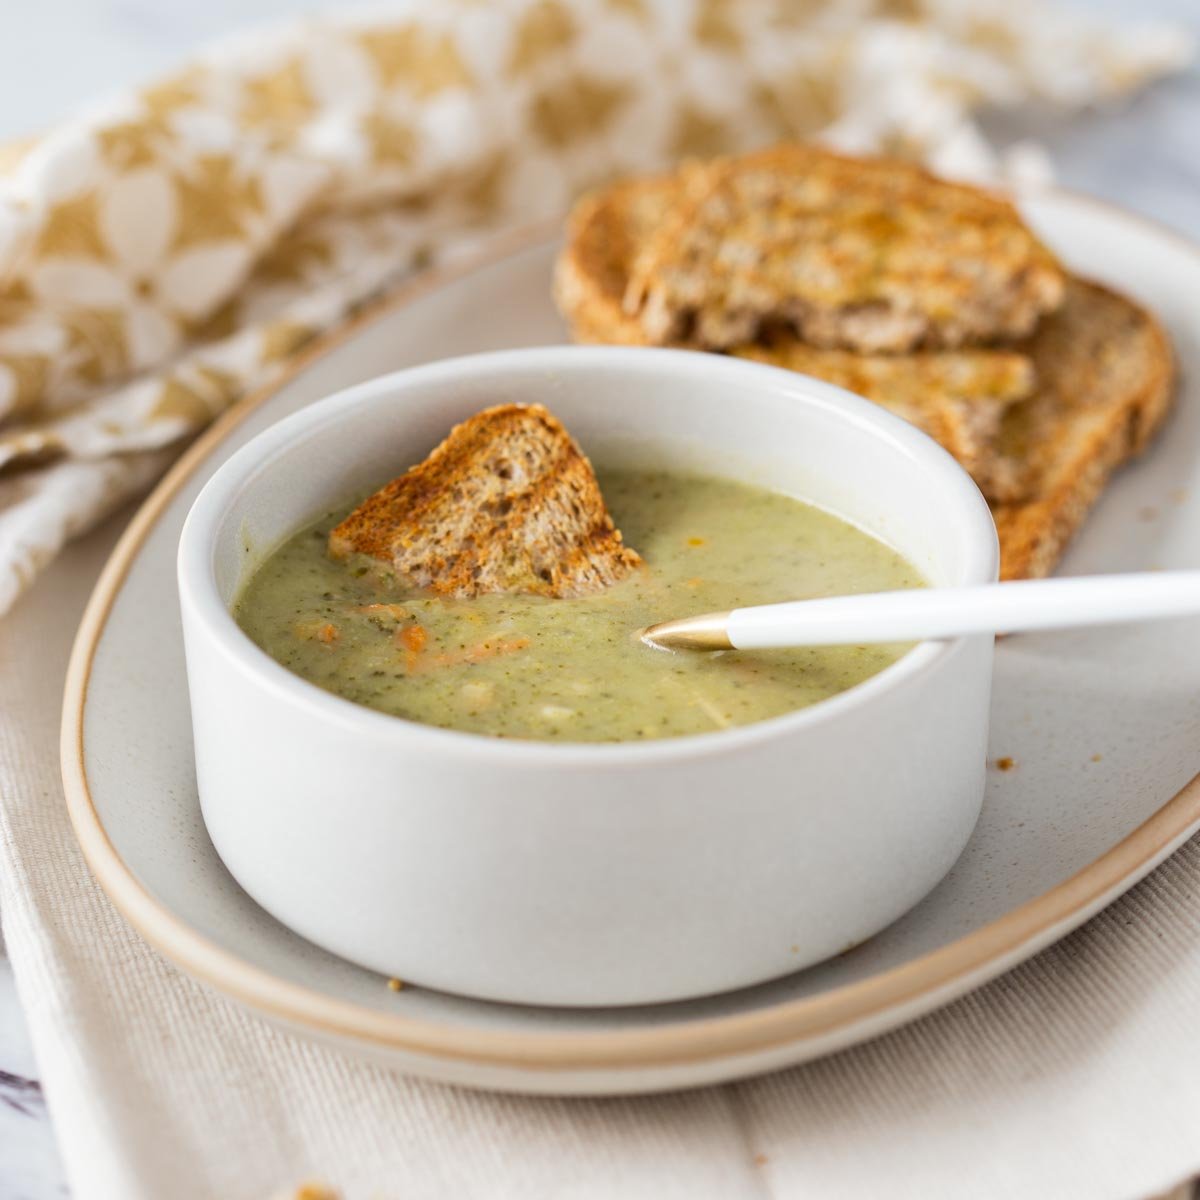 Instant pot broccoli cheese soup in a serving bowl with toasted bread on the side.